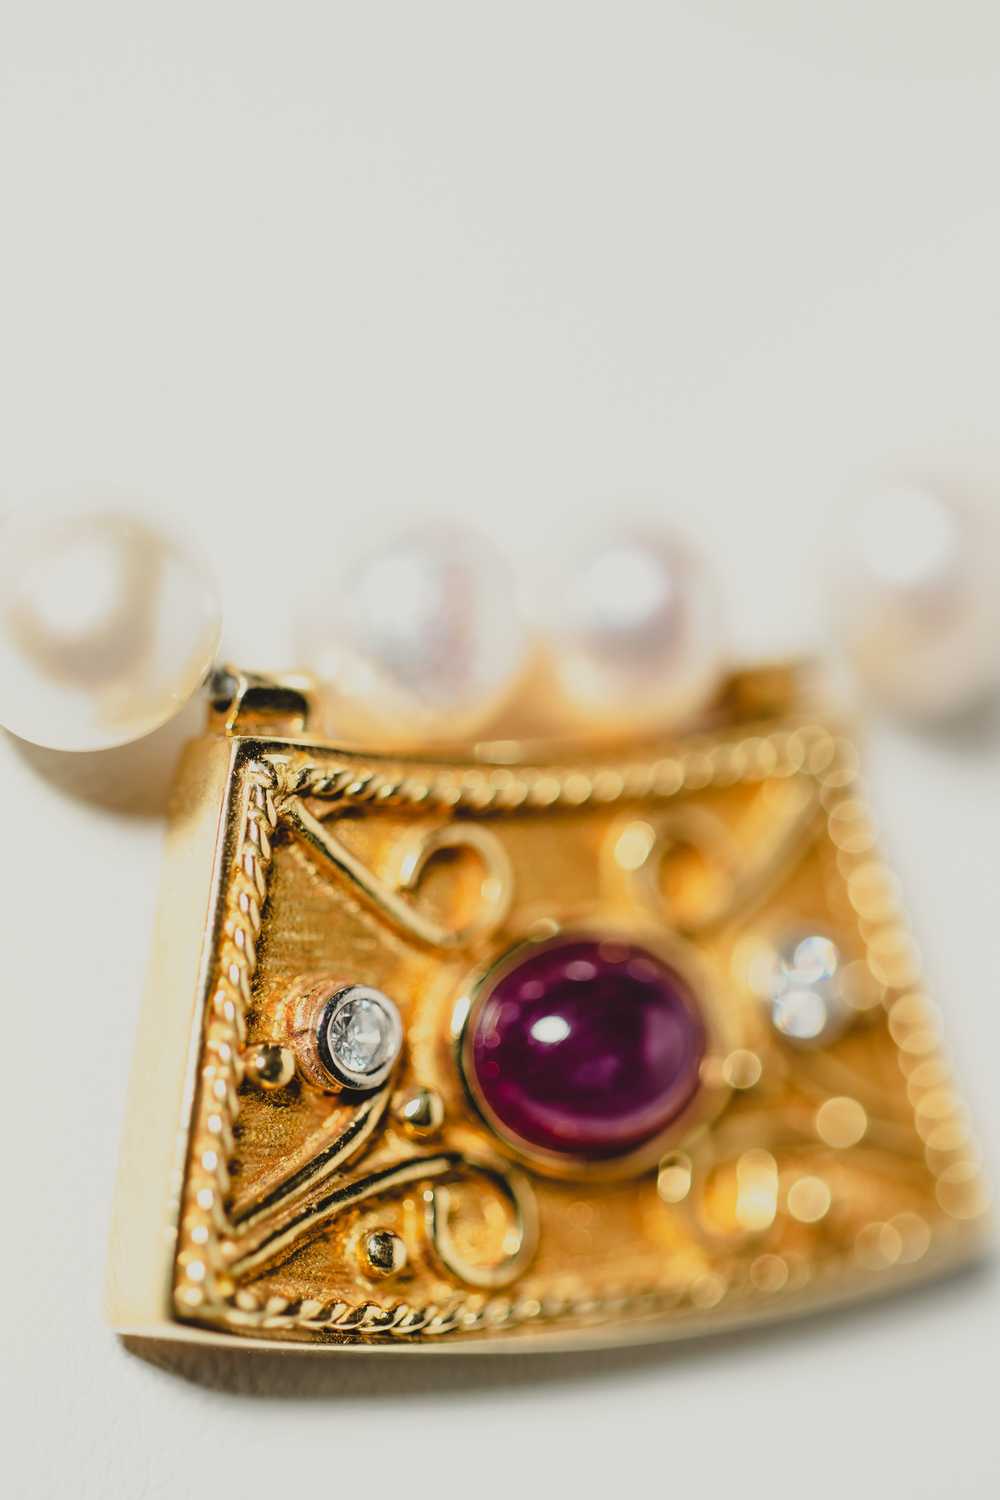 Pearl Necklace with Gold and Ruby Pendant - image 3